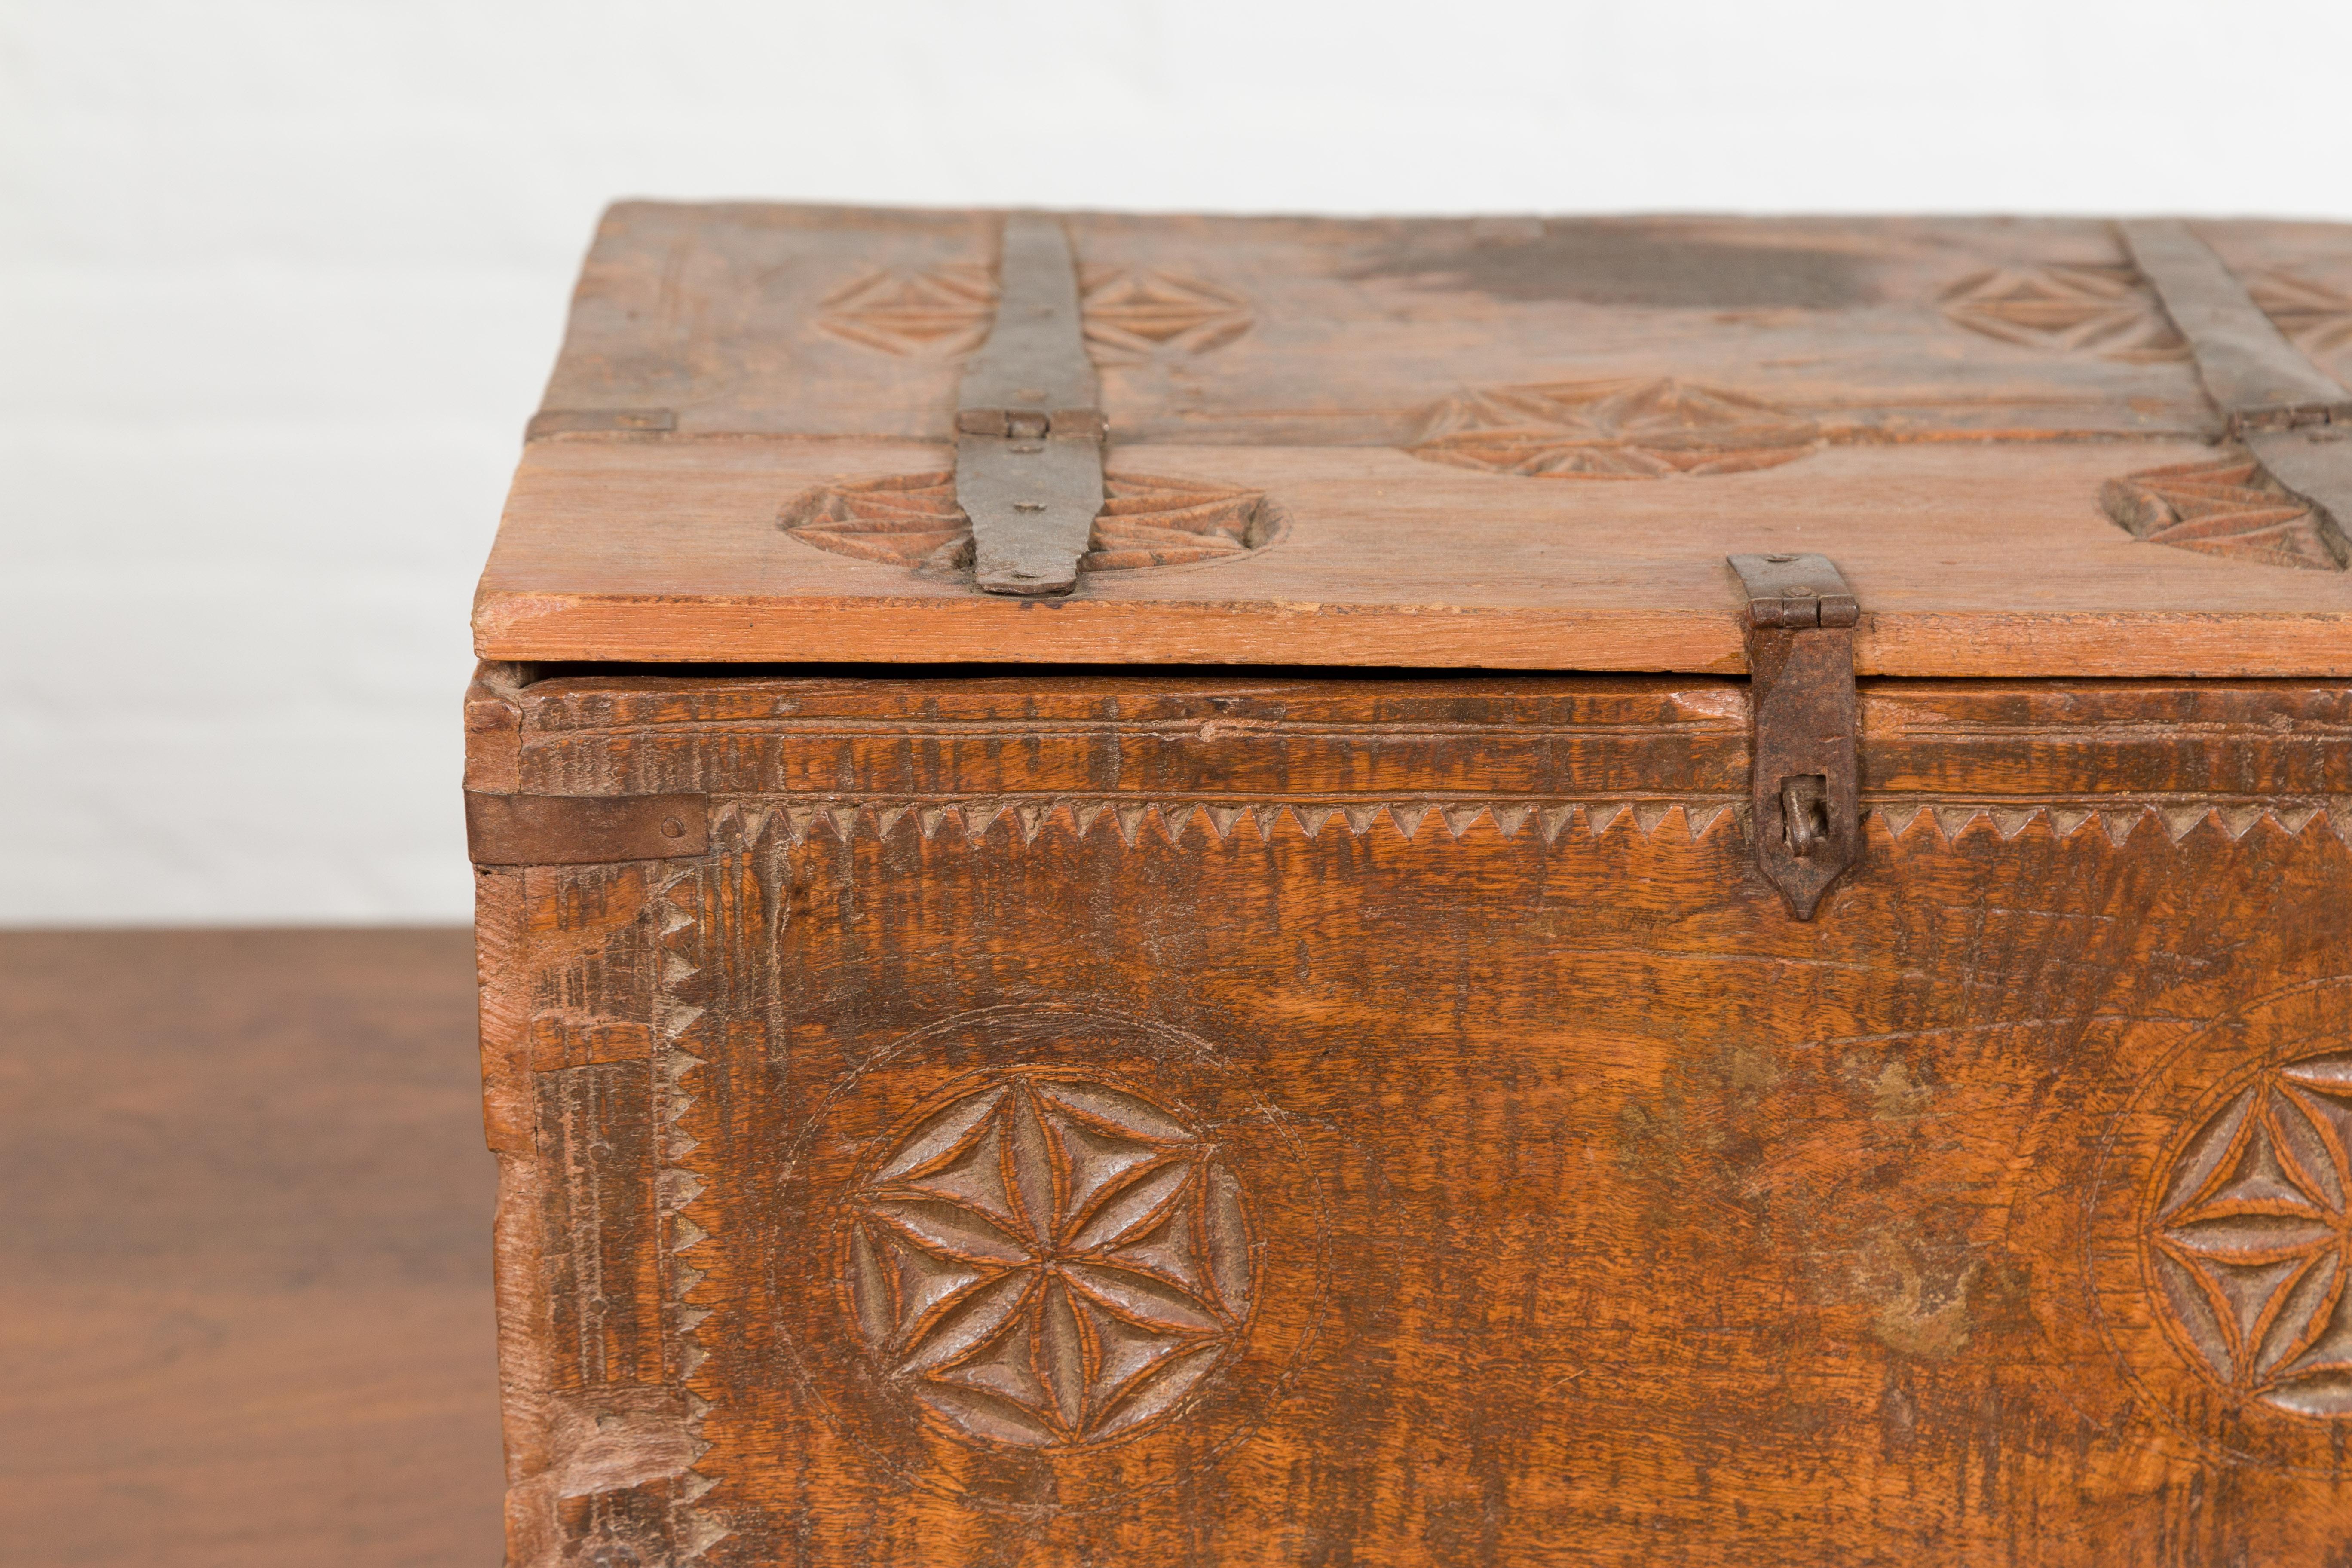 Indian 19th Century Small Wooden Box with Iron Hardware and Carved Rosacea For Sale 1